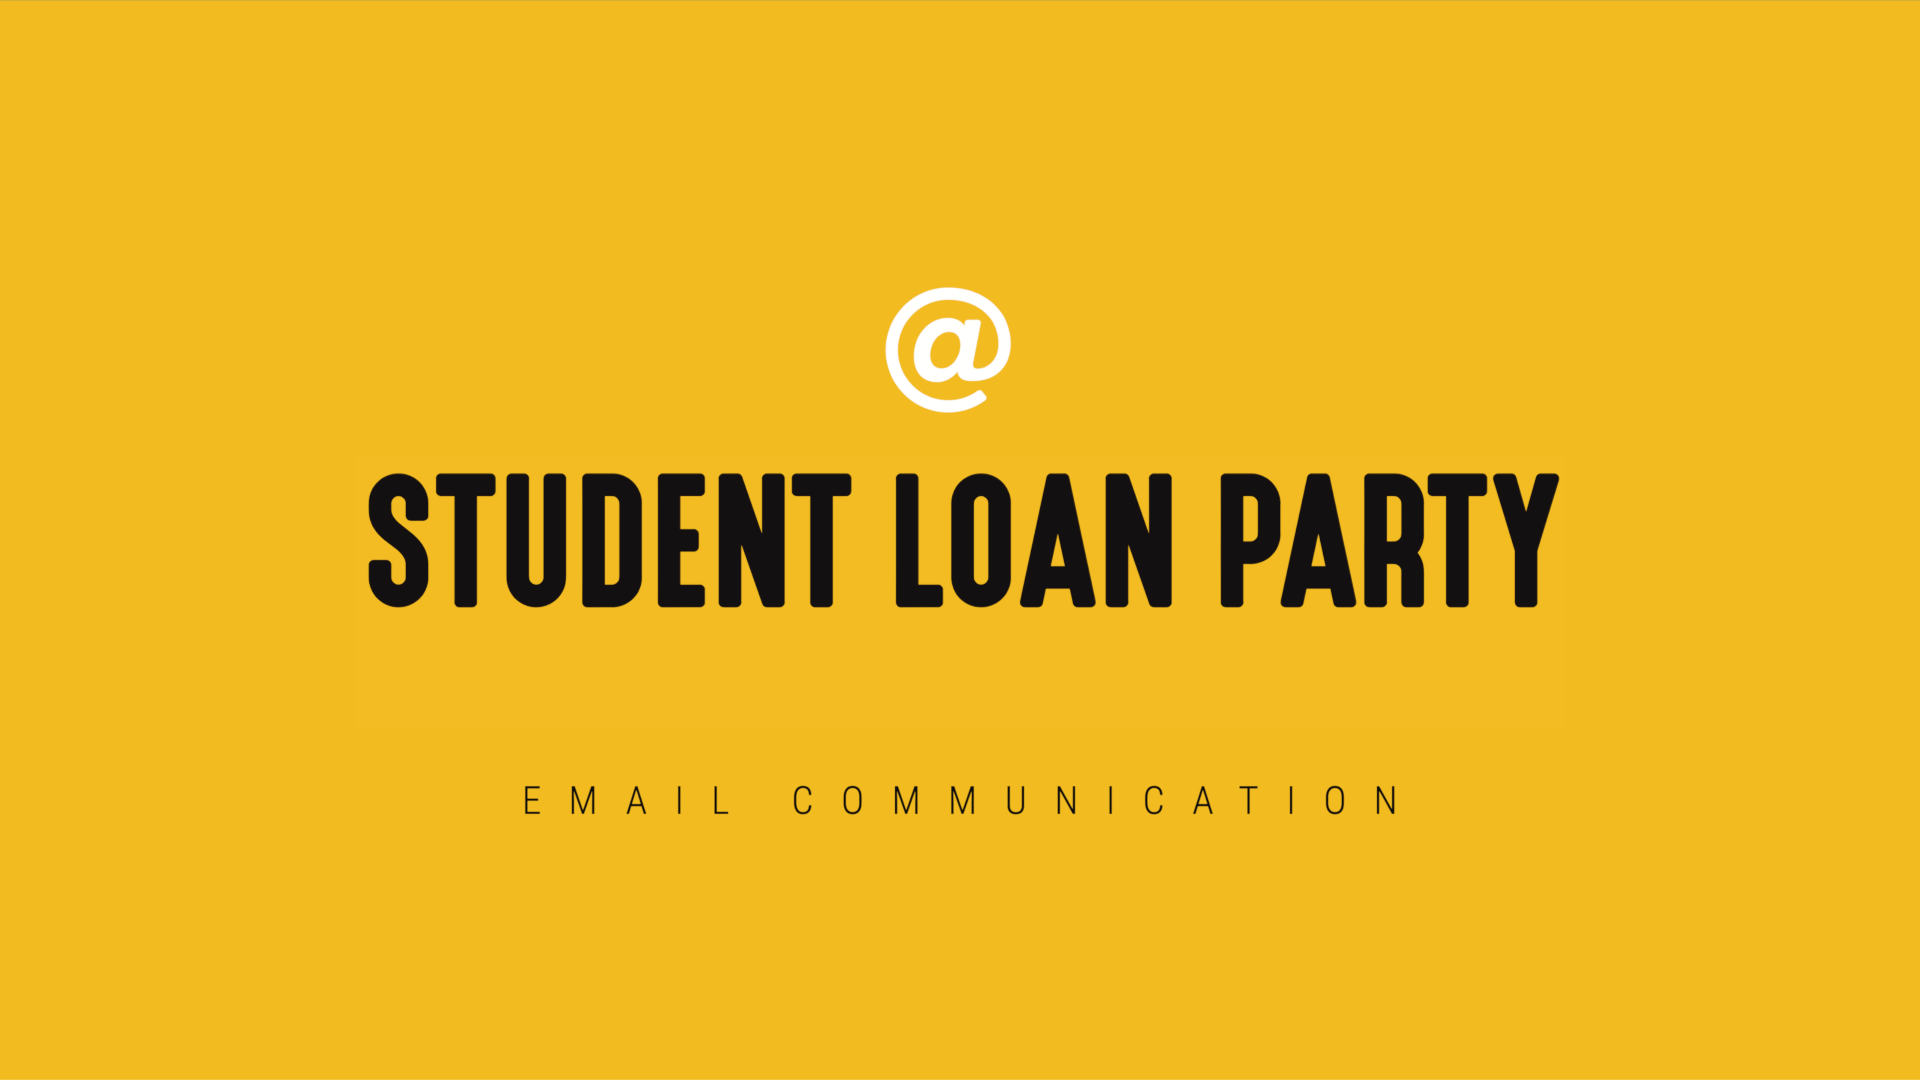 [NEW] Student Loan Party - Timely Email